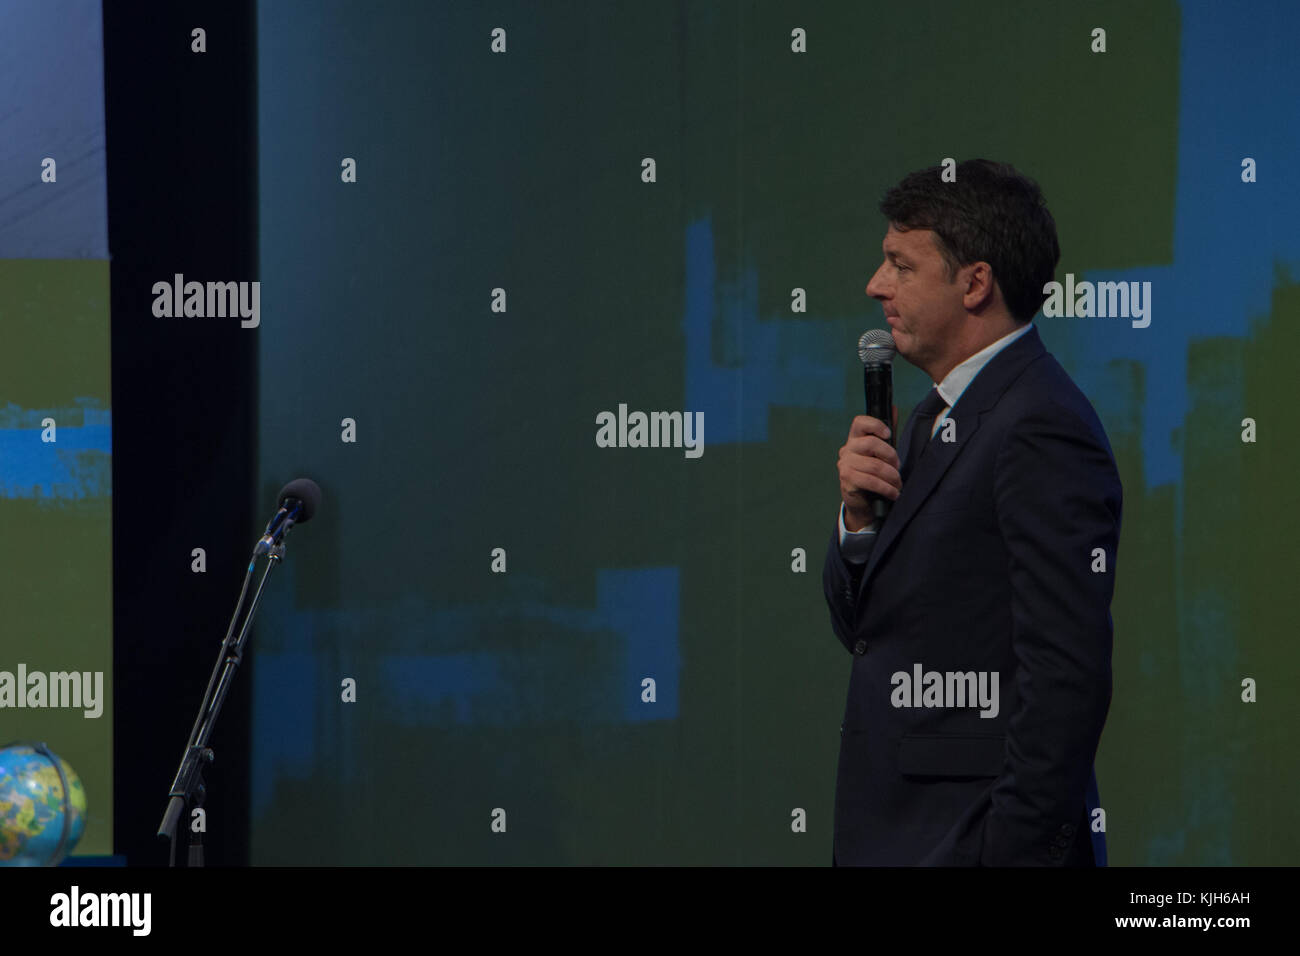 Florence, Italy. 24th November, 2017. Speaking at the Leopolda 8 Cnference in Florence, Italy, former Italian Prime Minister and leader of the Partito Democratico (Pd) Matteo Renzi. Credit: Joseph Suschitzky/Alamy Live News Stock Photo